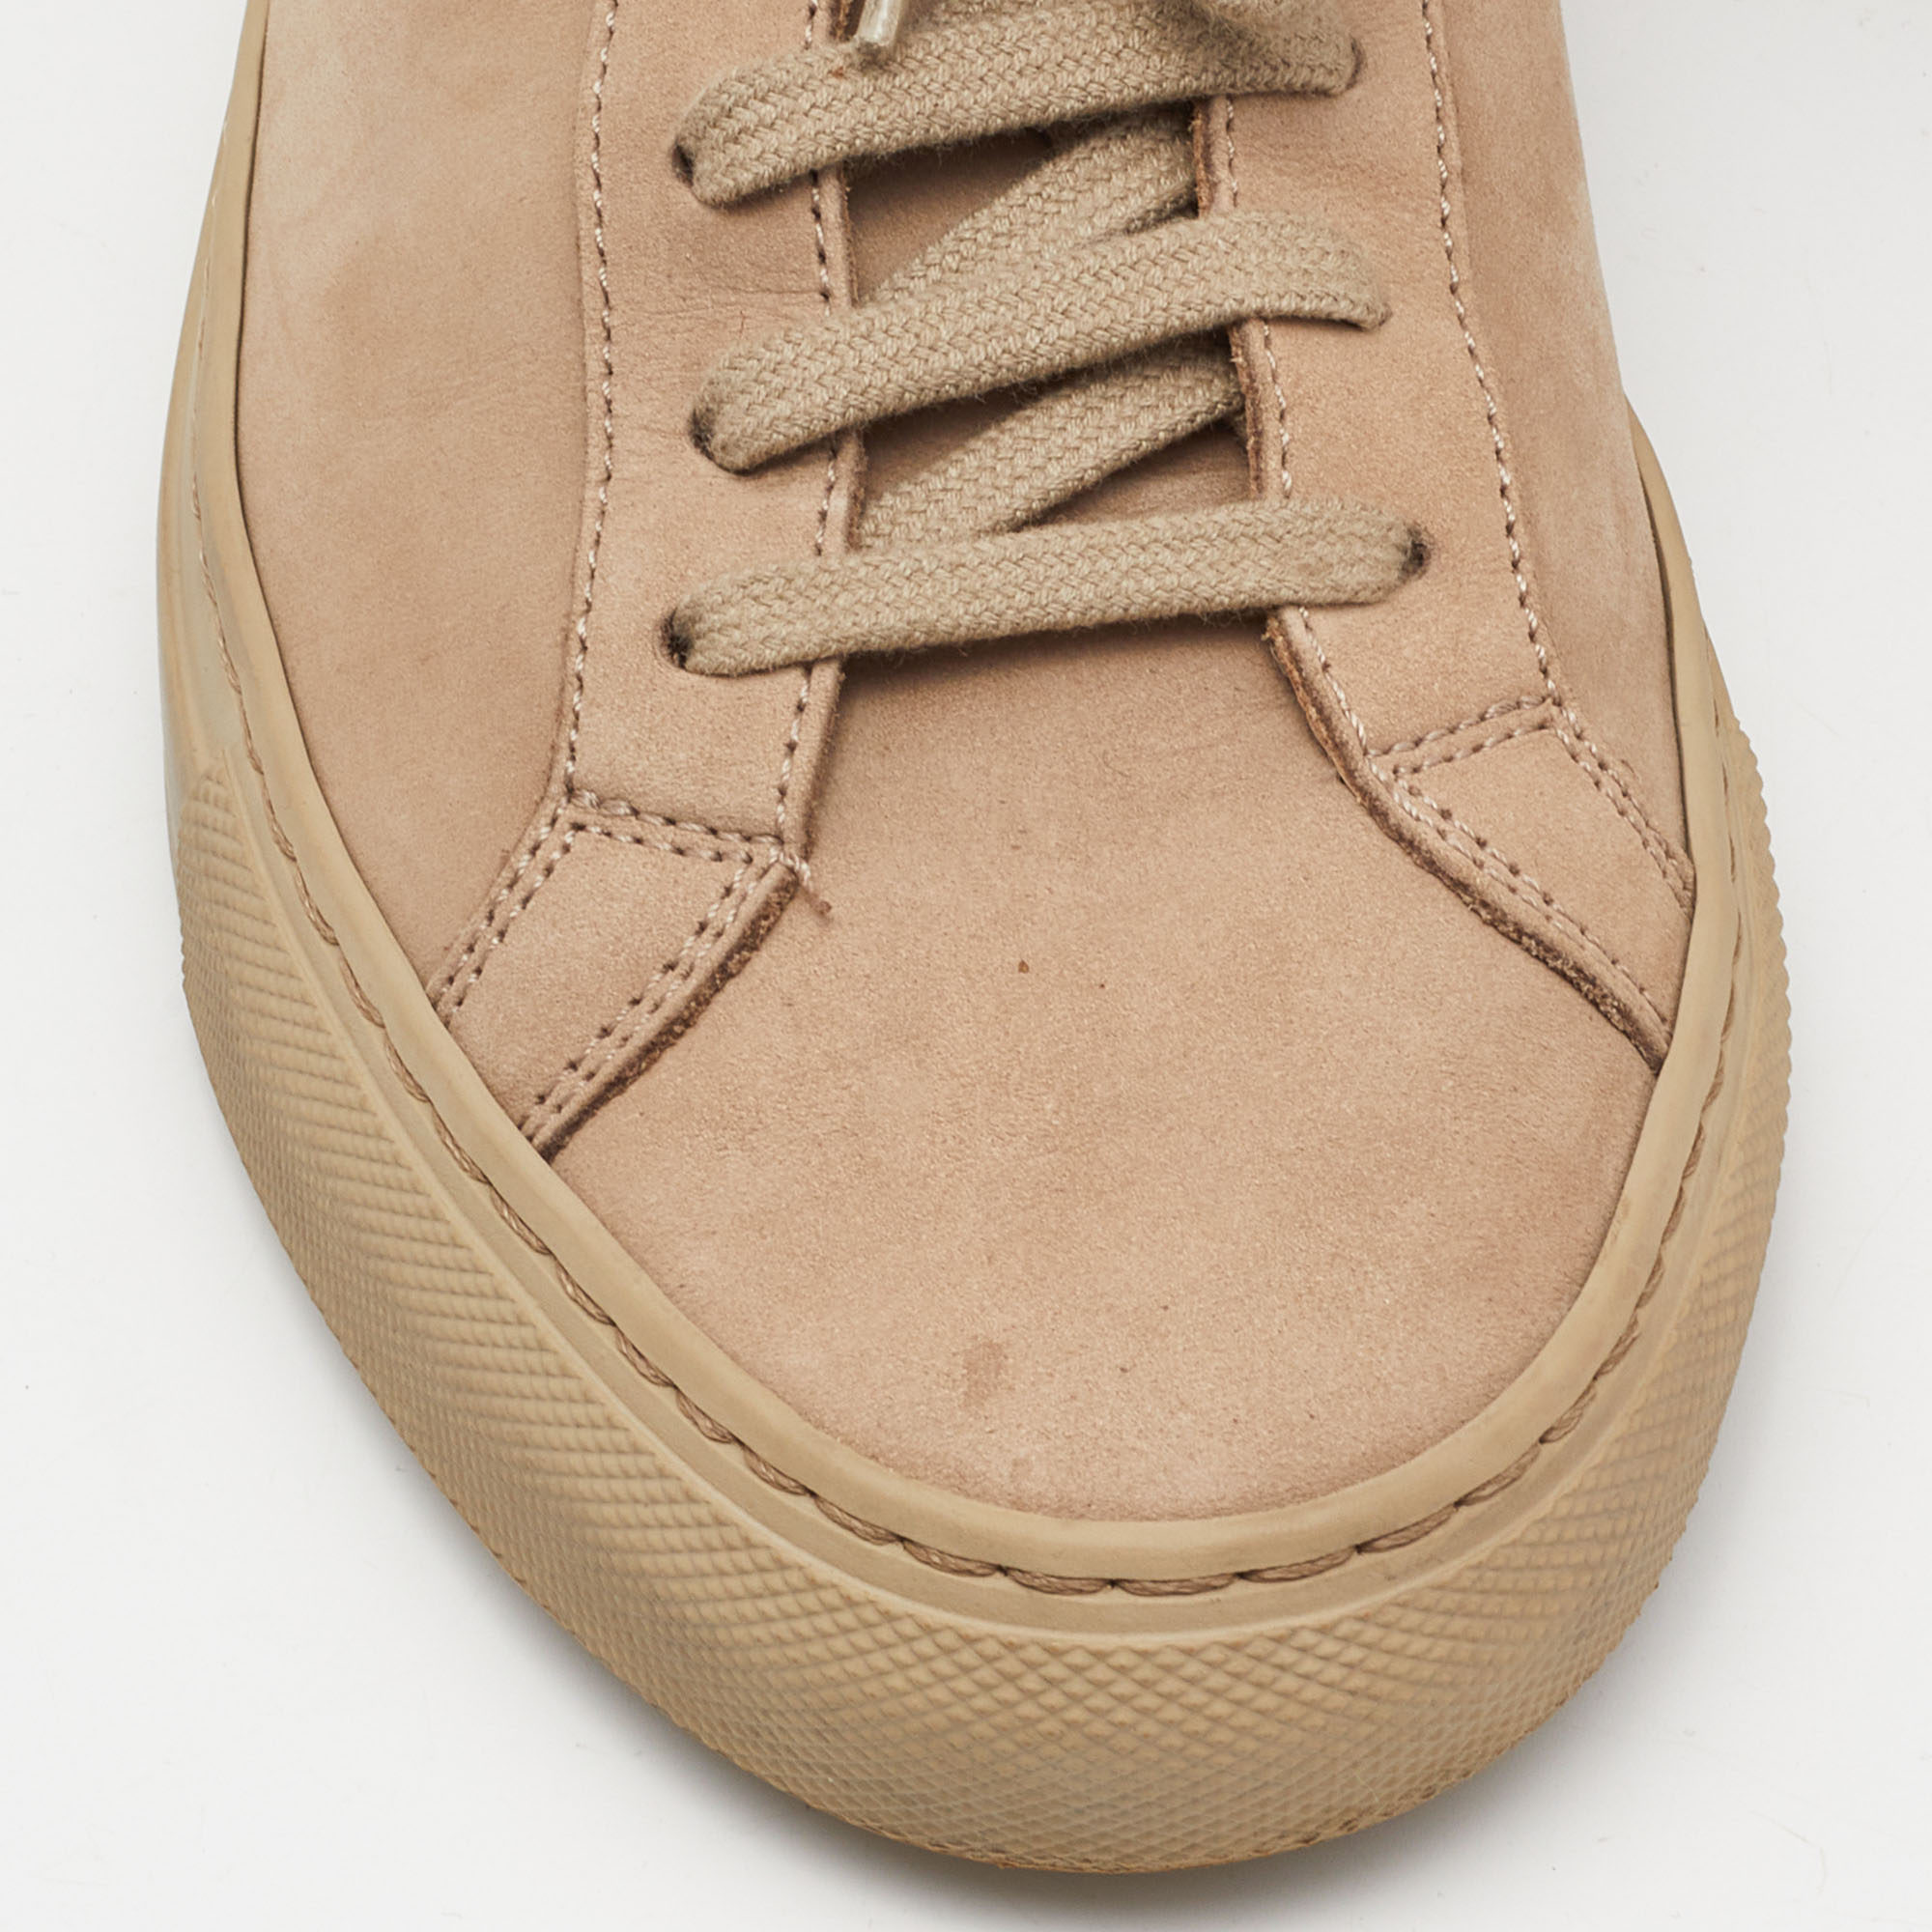 Common Projects Beige Suede Achilles Lace Up Sneakers Size 37